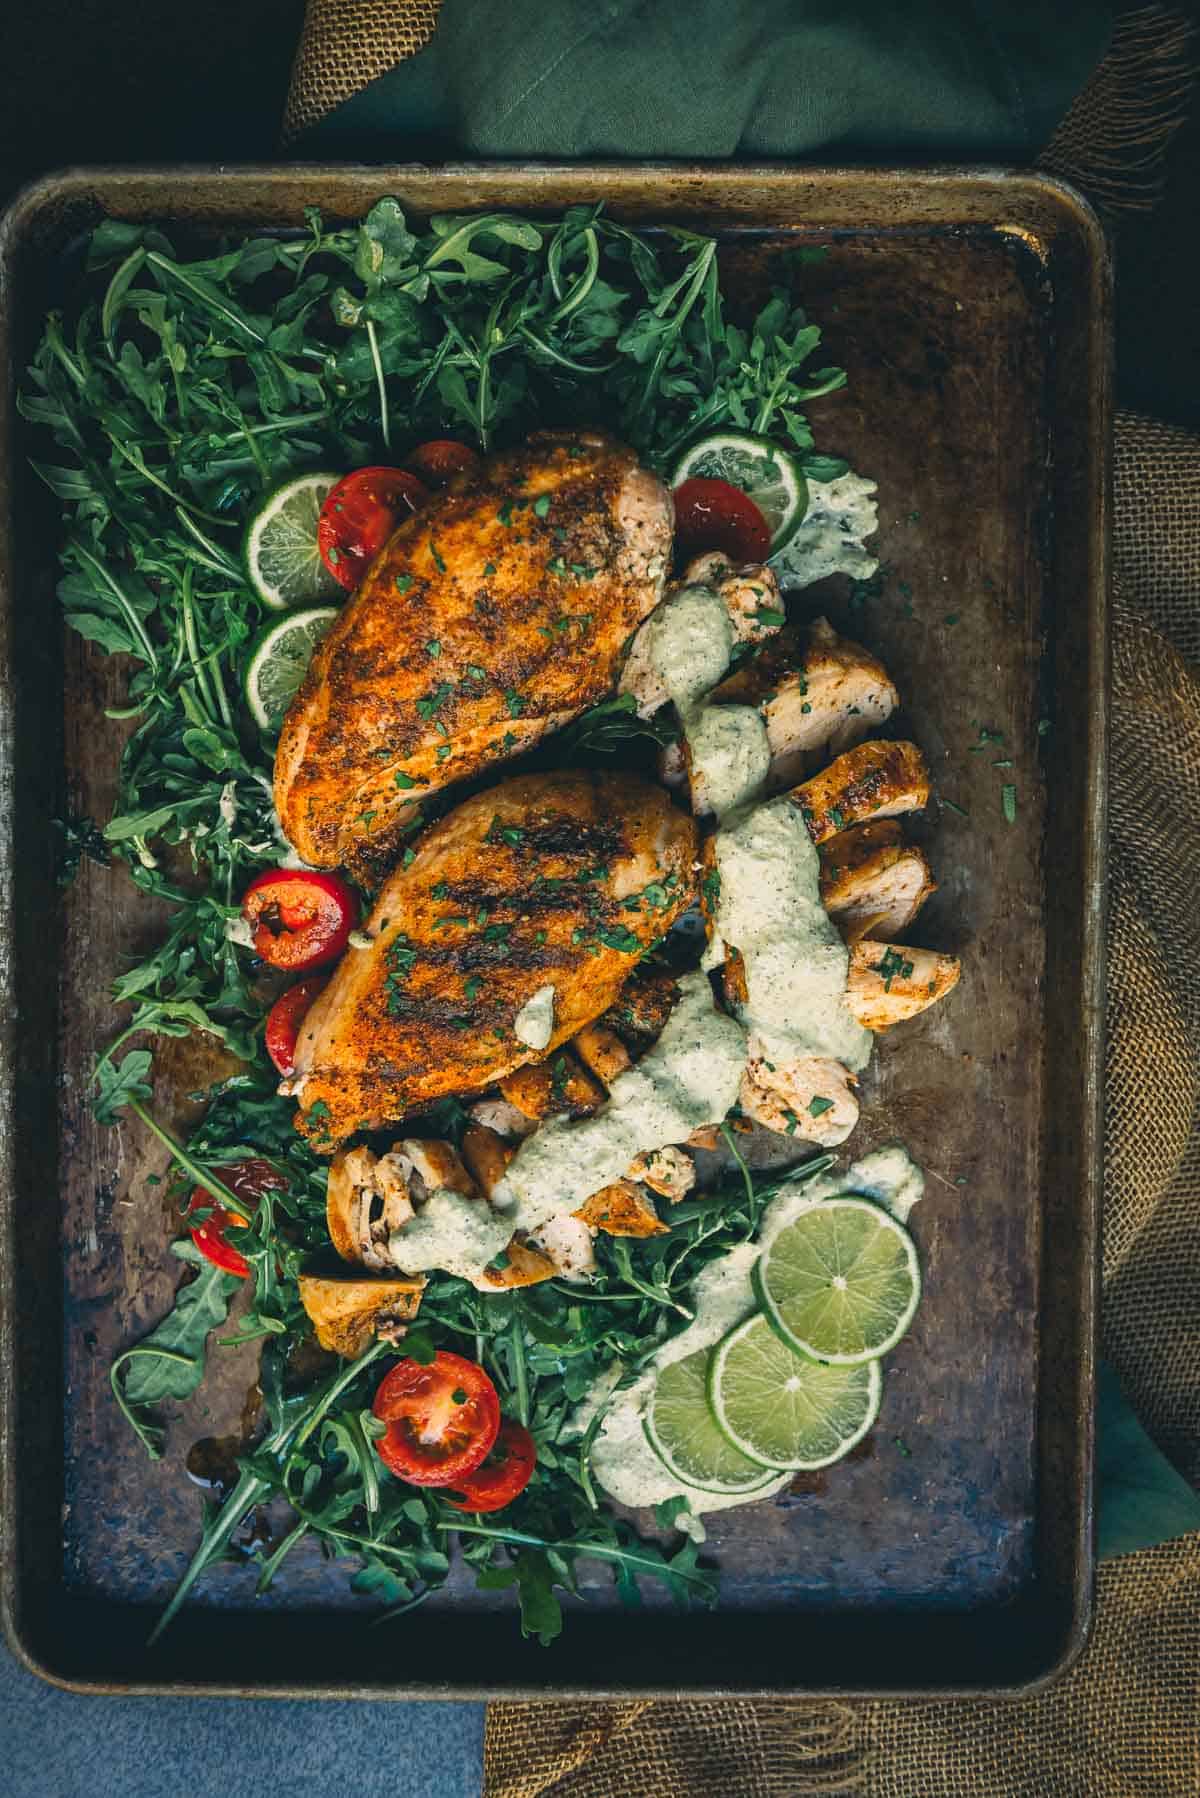 Grilled chicken breasts on a platter with greens, tomatoes, limes and sauce.